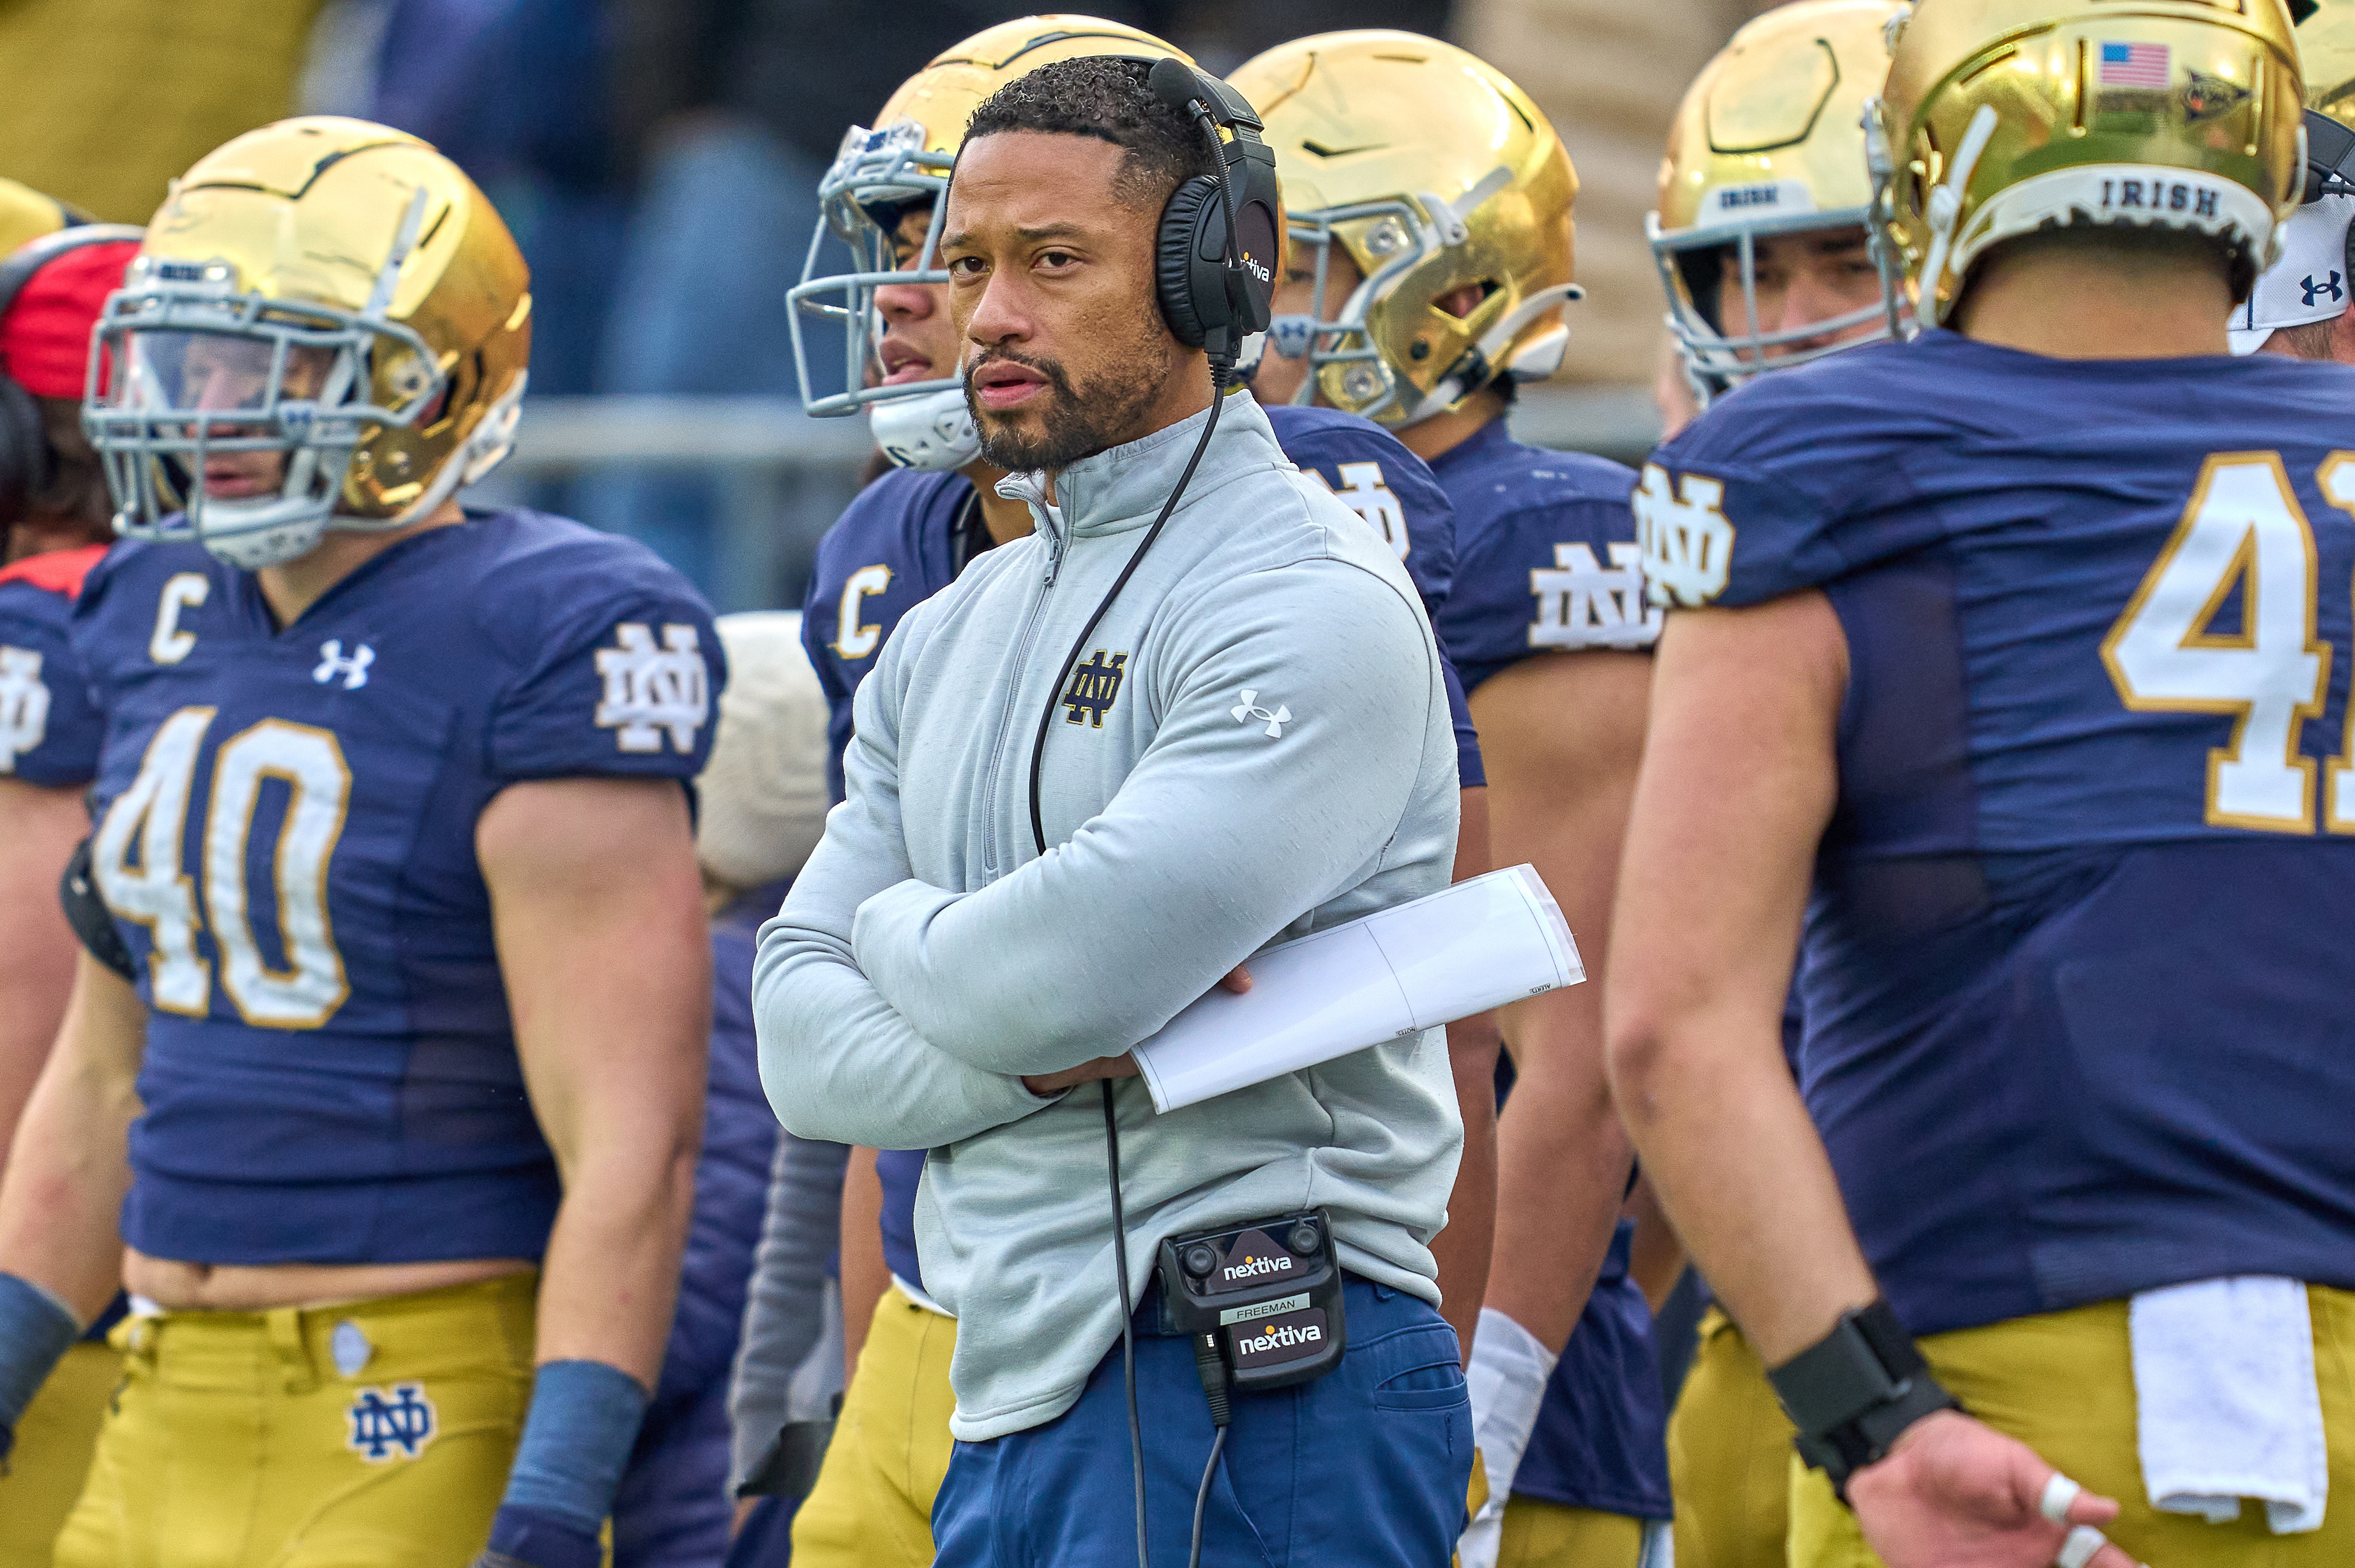 Notre Dame HC Rumors: Marcus Freeman, Luke Fickell Candidates to Replace Brian Kelly